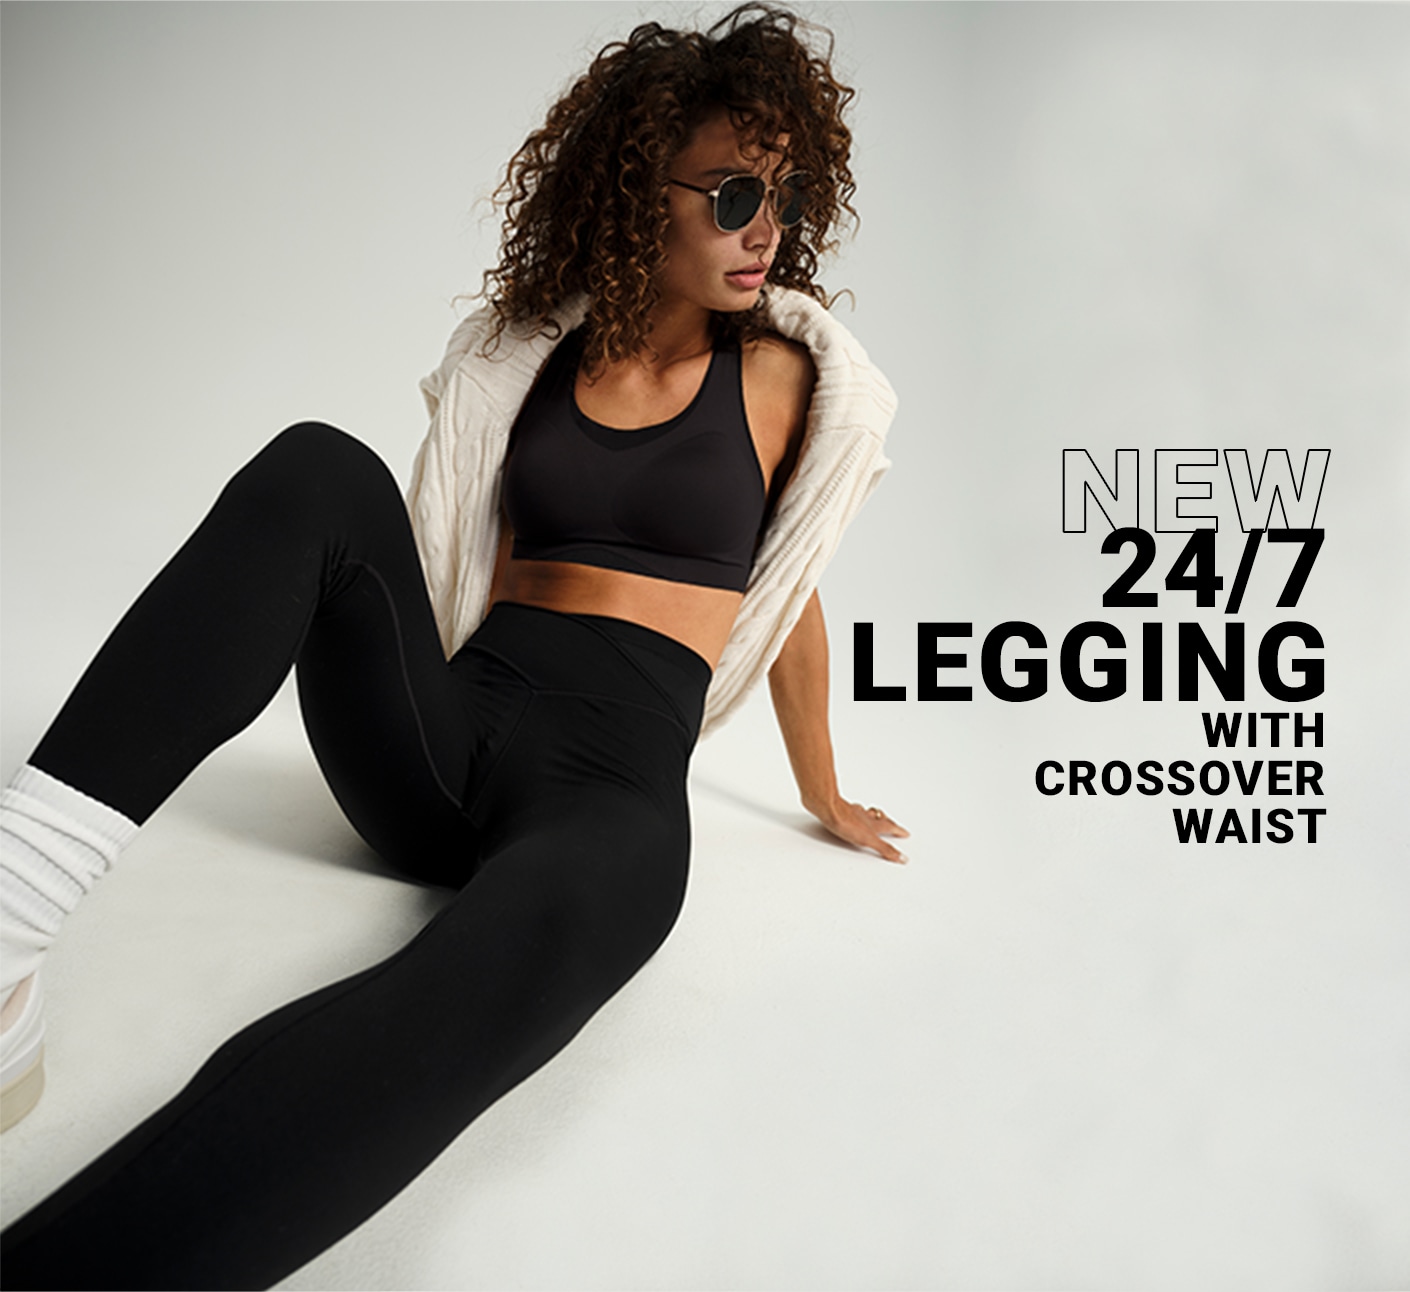 New 24/7 Leggings with crossover waist.